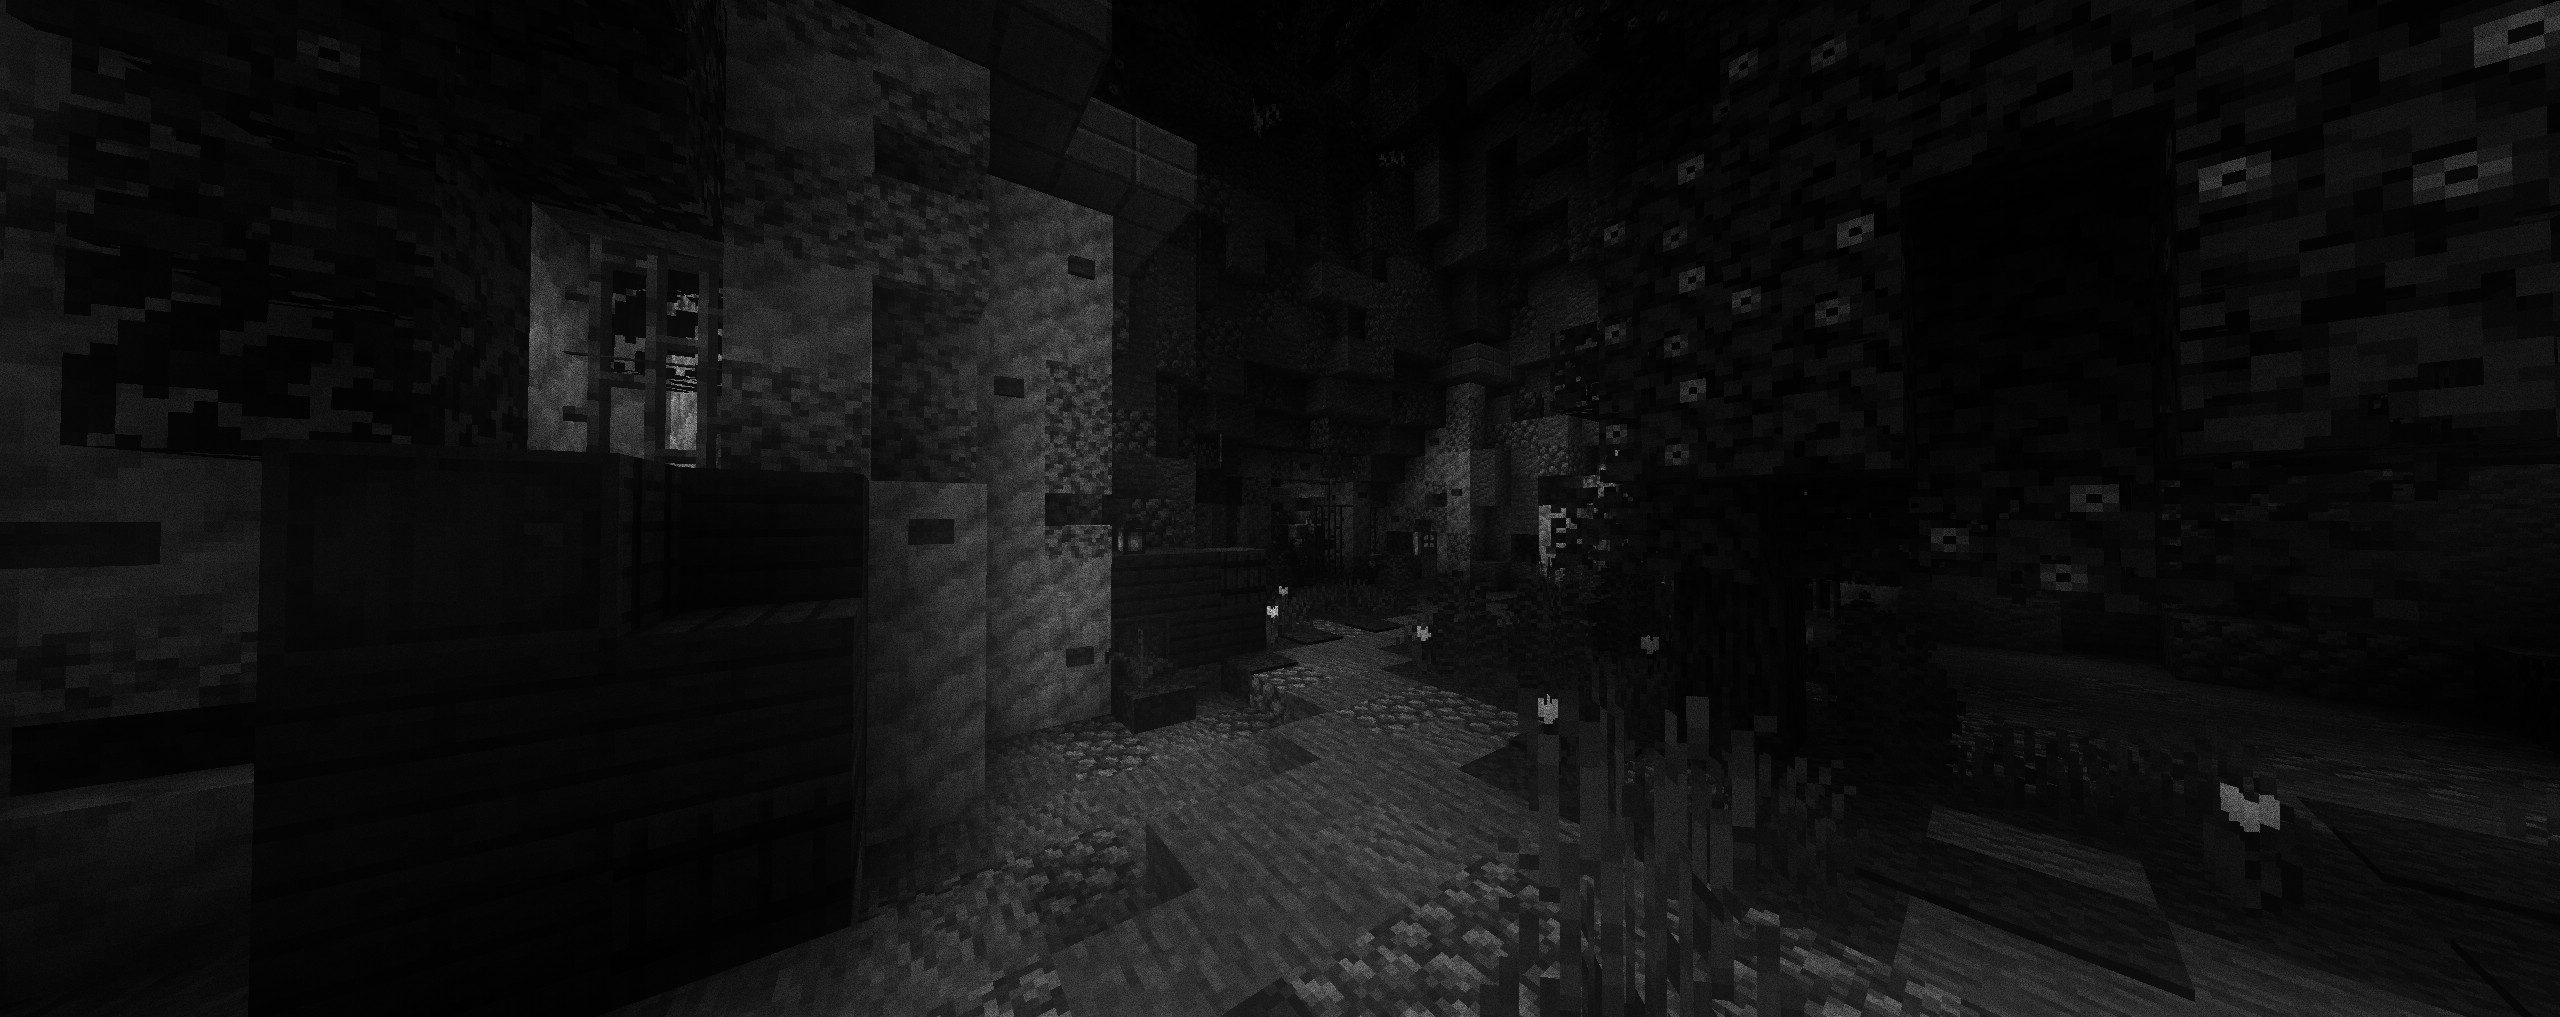 Lymbo Shaders (1.20.4, 1.19.4) - Gray World, Ghostly Covering 2